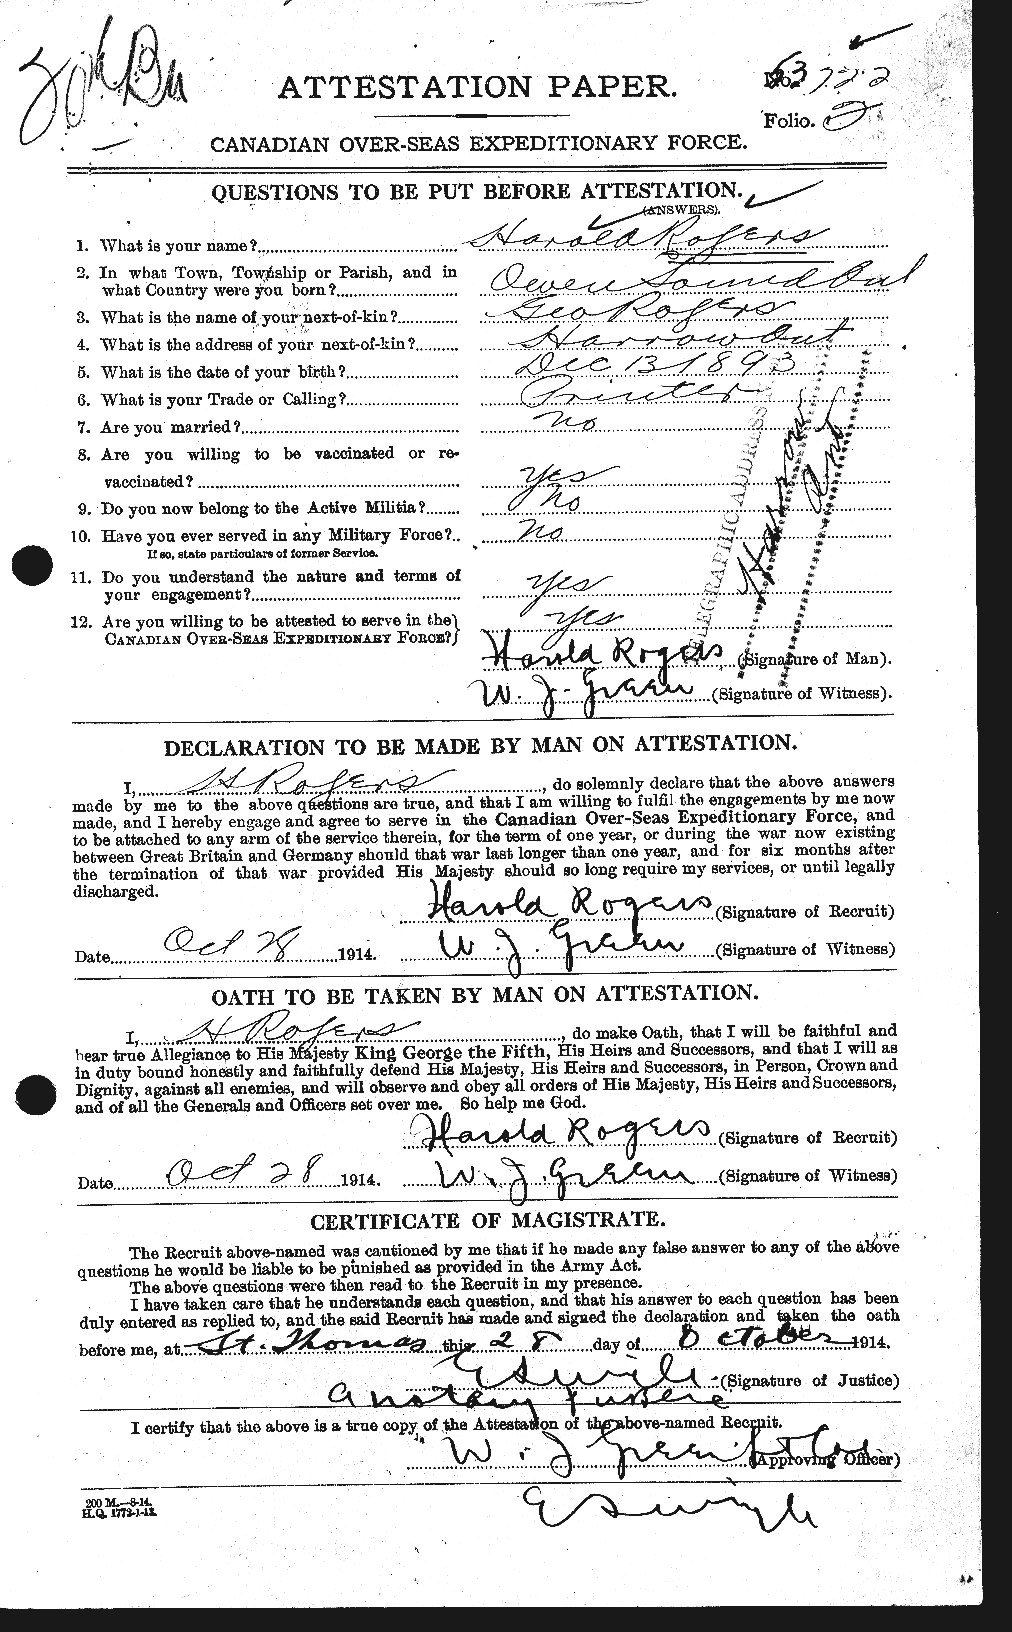 Personnel Records of the First World War - CEF 611116a